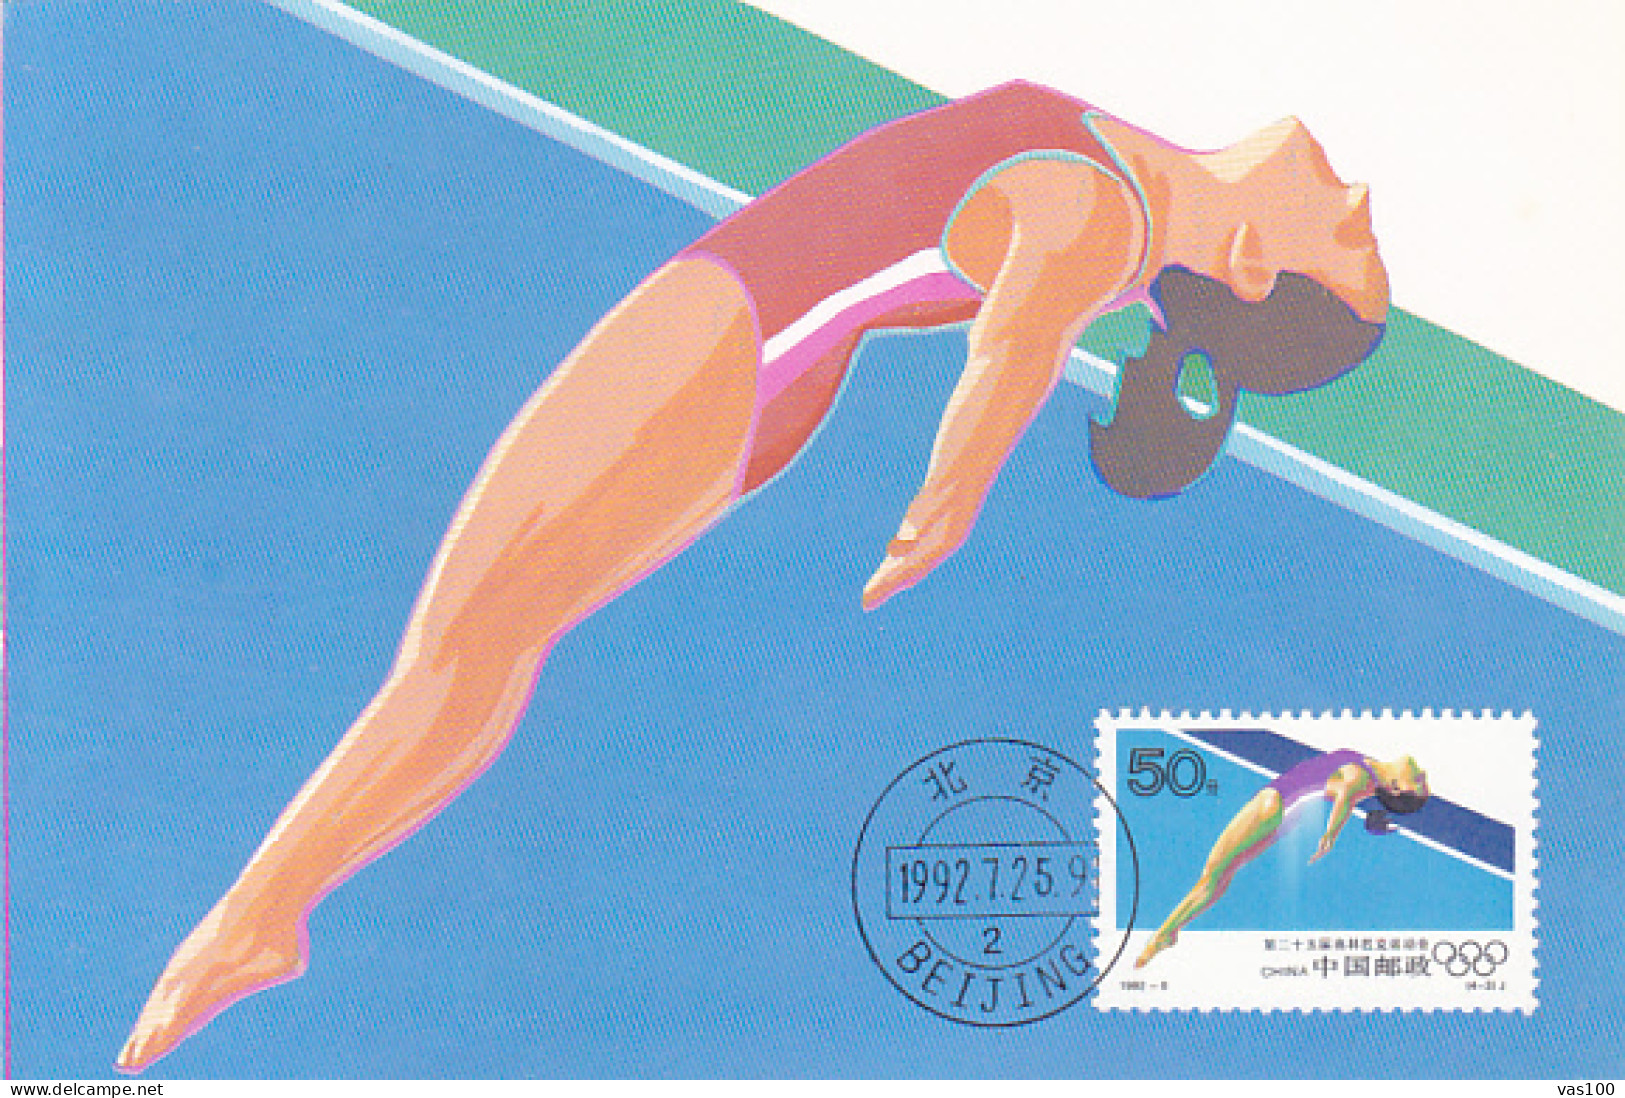 SPORTS, DIVING, BARCELONA'92 OLYMPIC GAMES, CM, MAXICARD, CARTES MAXIMUM, 1992, CHINA - Immersione